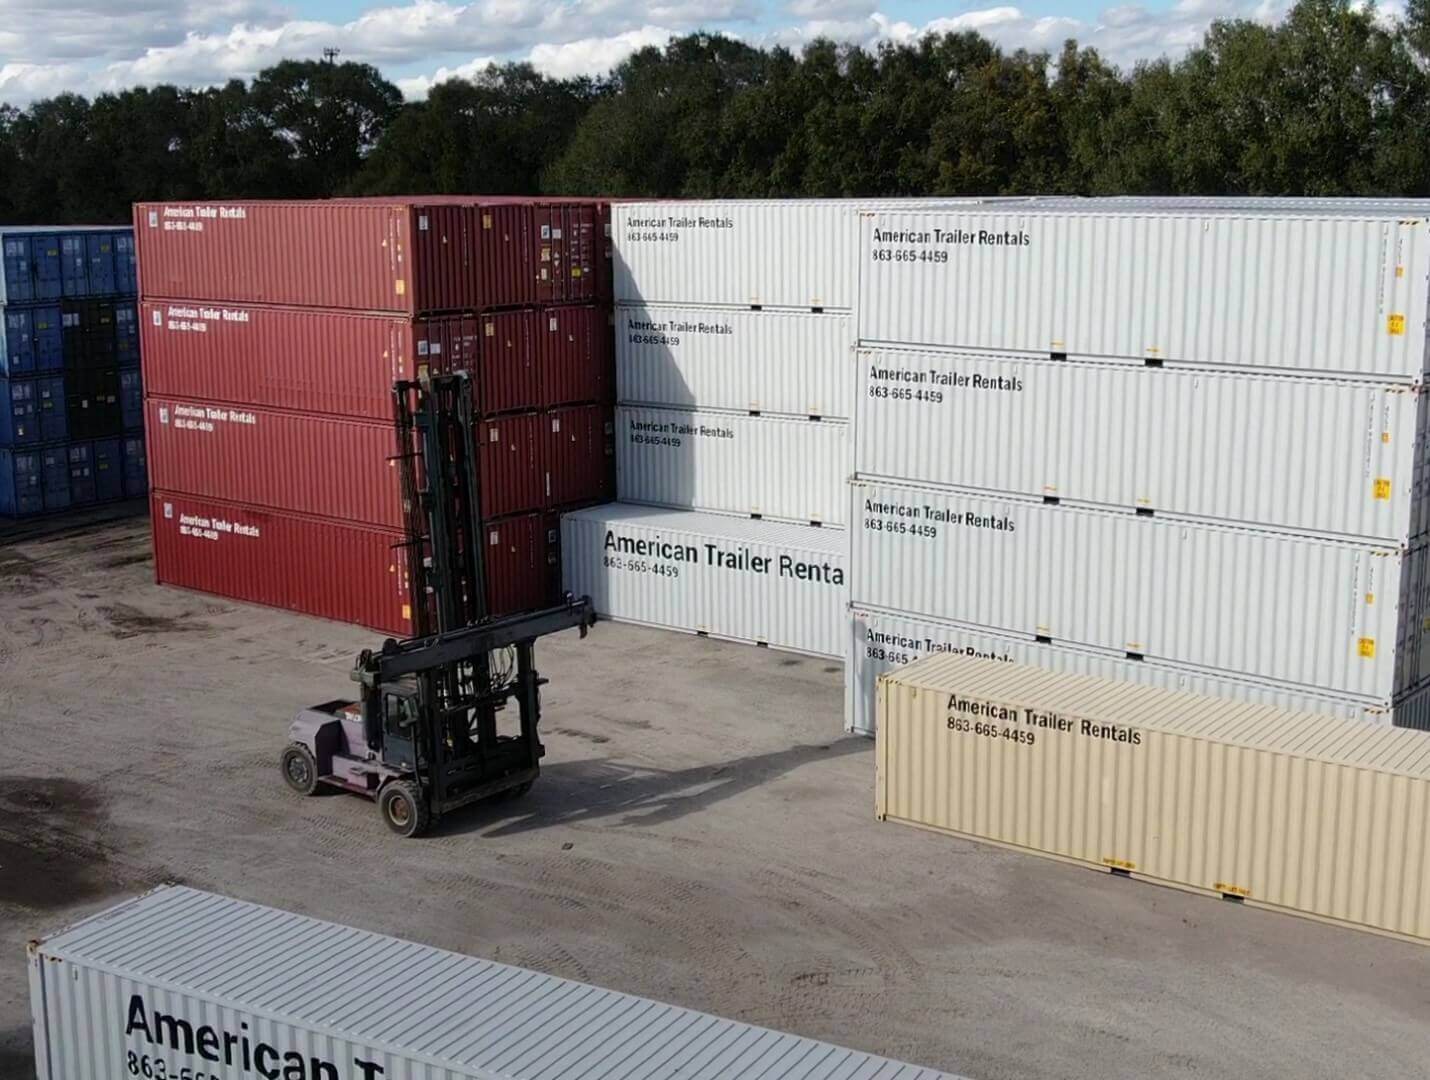 Top Loader in shipping container yard